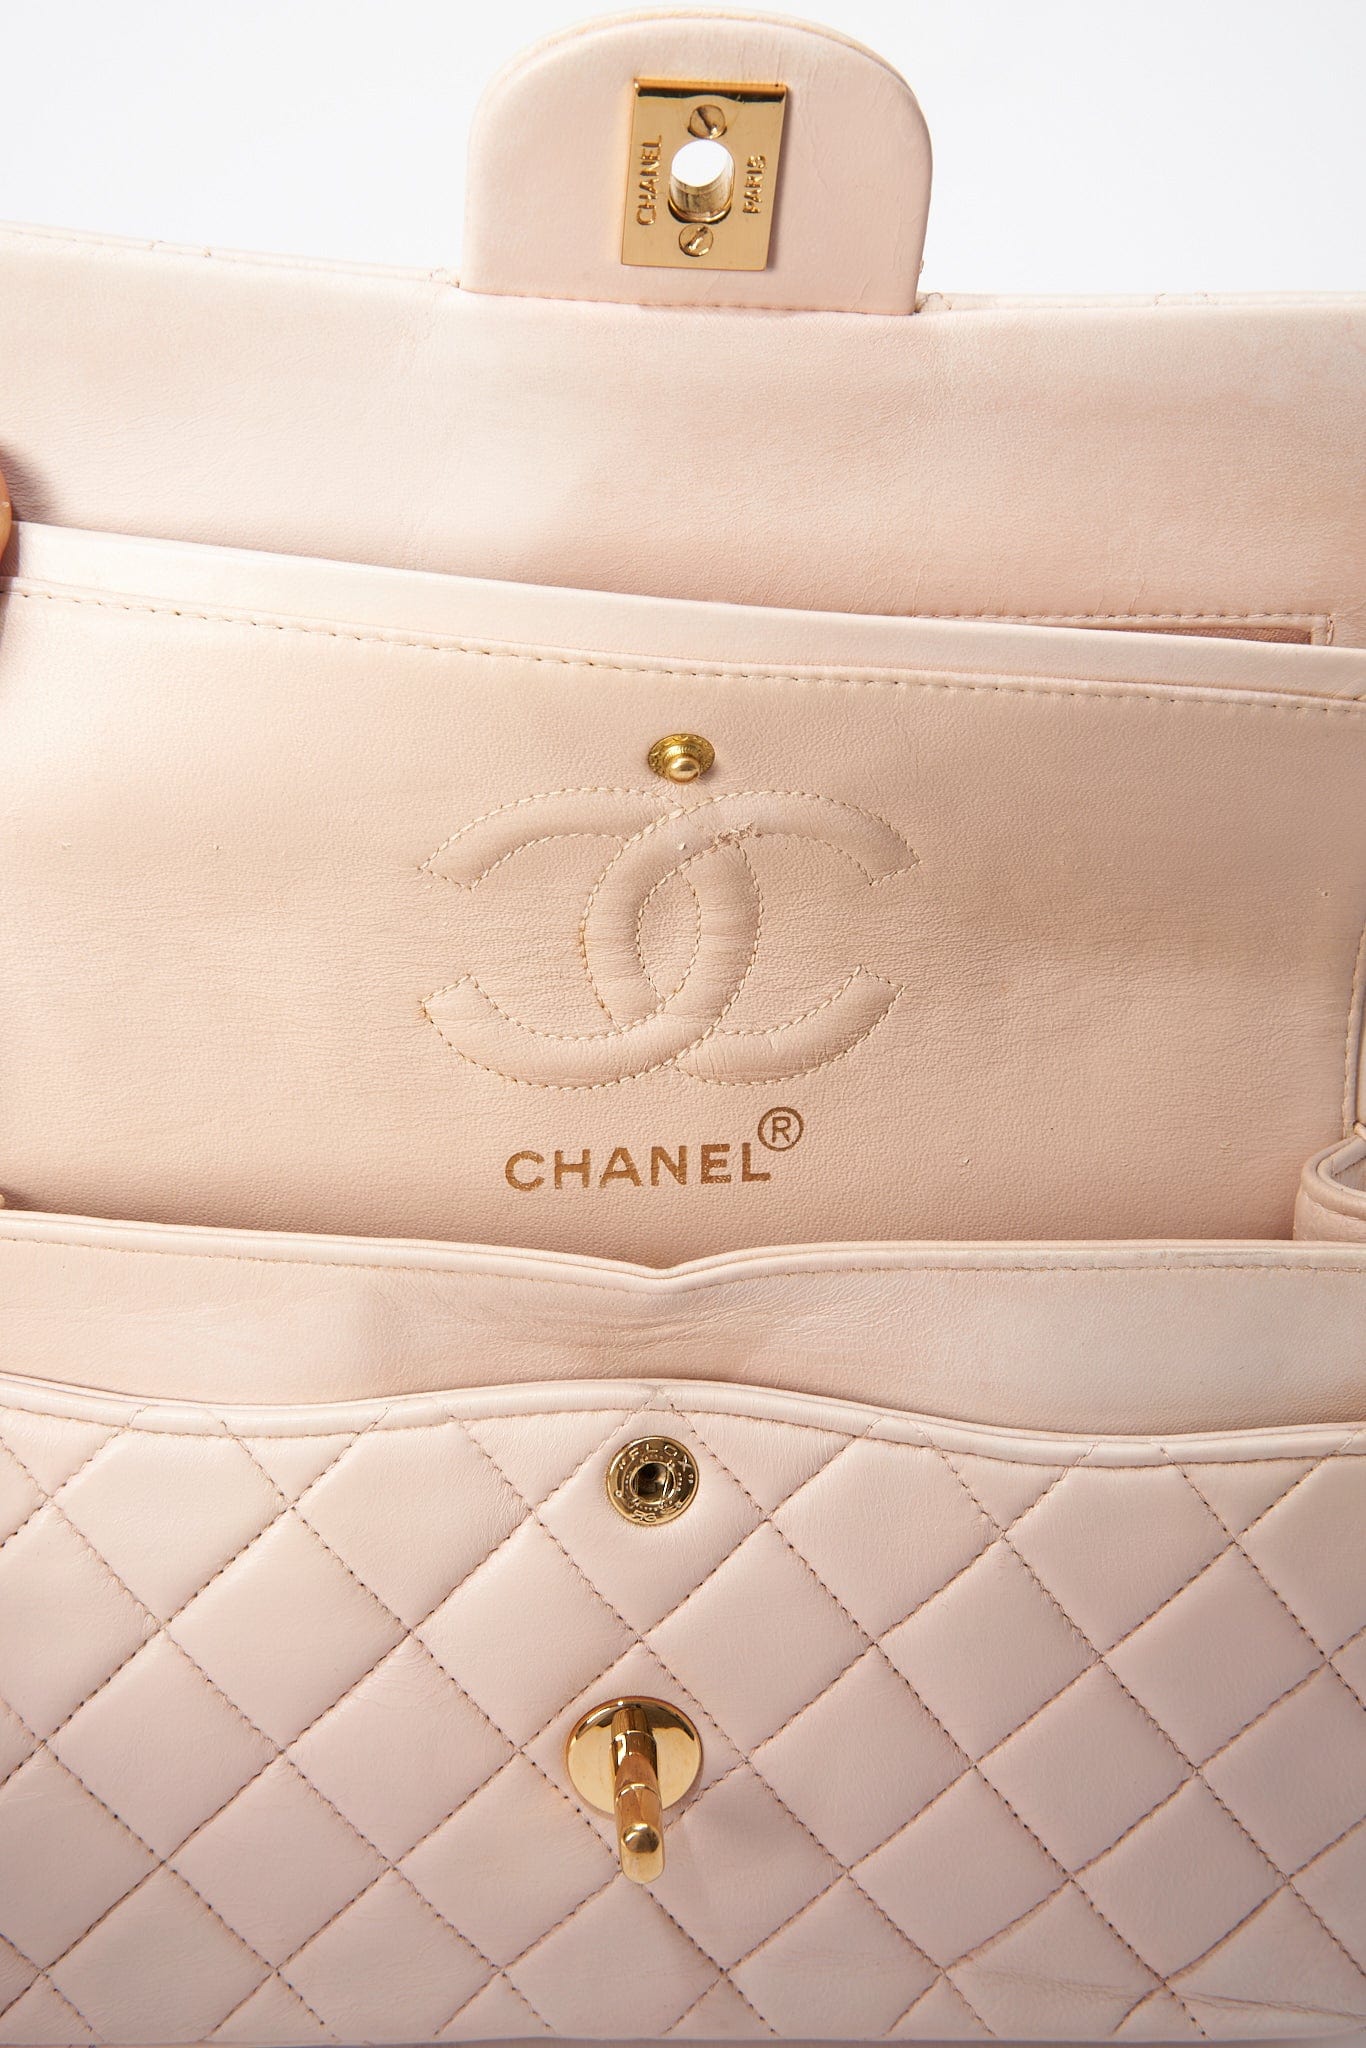 CHANEL CLASSIC FLAP BAG LIGHT PINK PYTHON with interwoven brass and  leather chain matching leather interior flap top with iconic CC turn lock  closure inside sticker 27086028 with box and dust bag